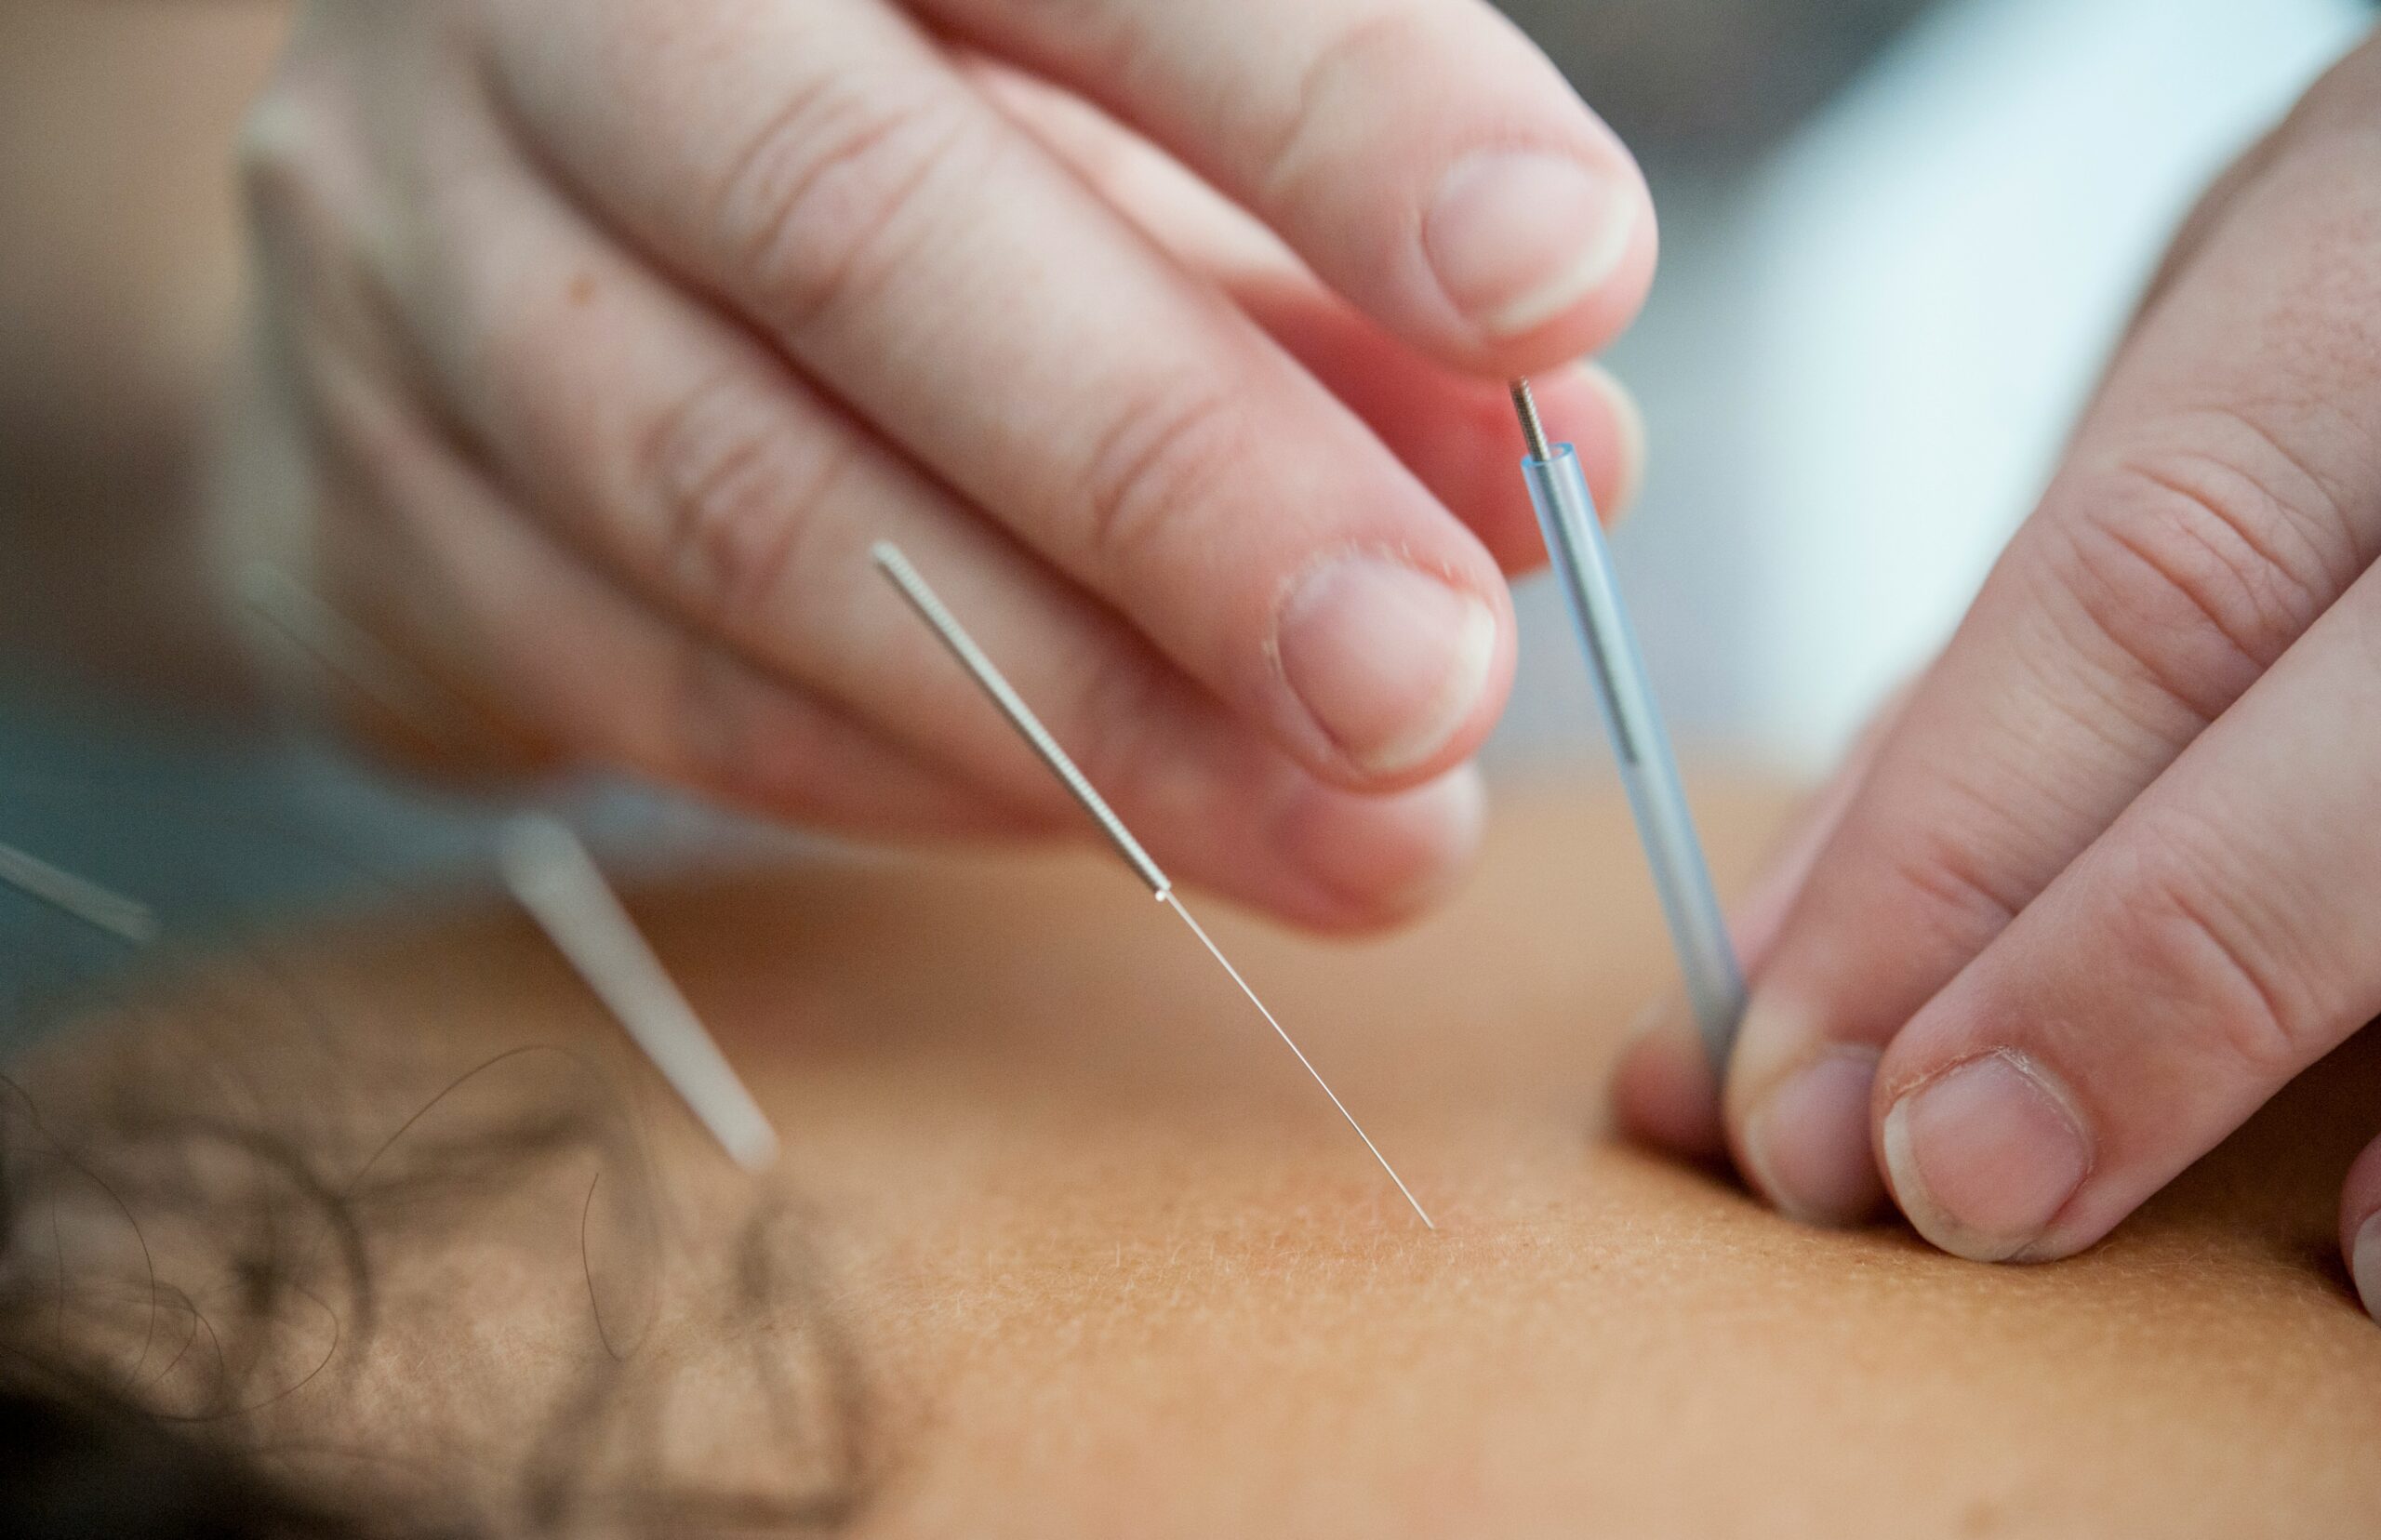 Is Acupuncture Real or a Placebo?